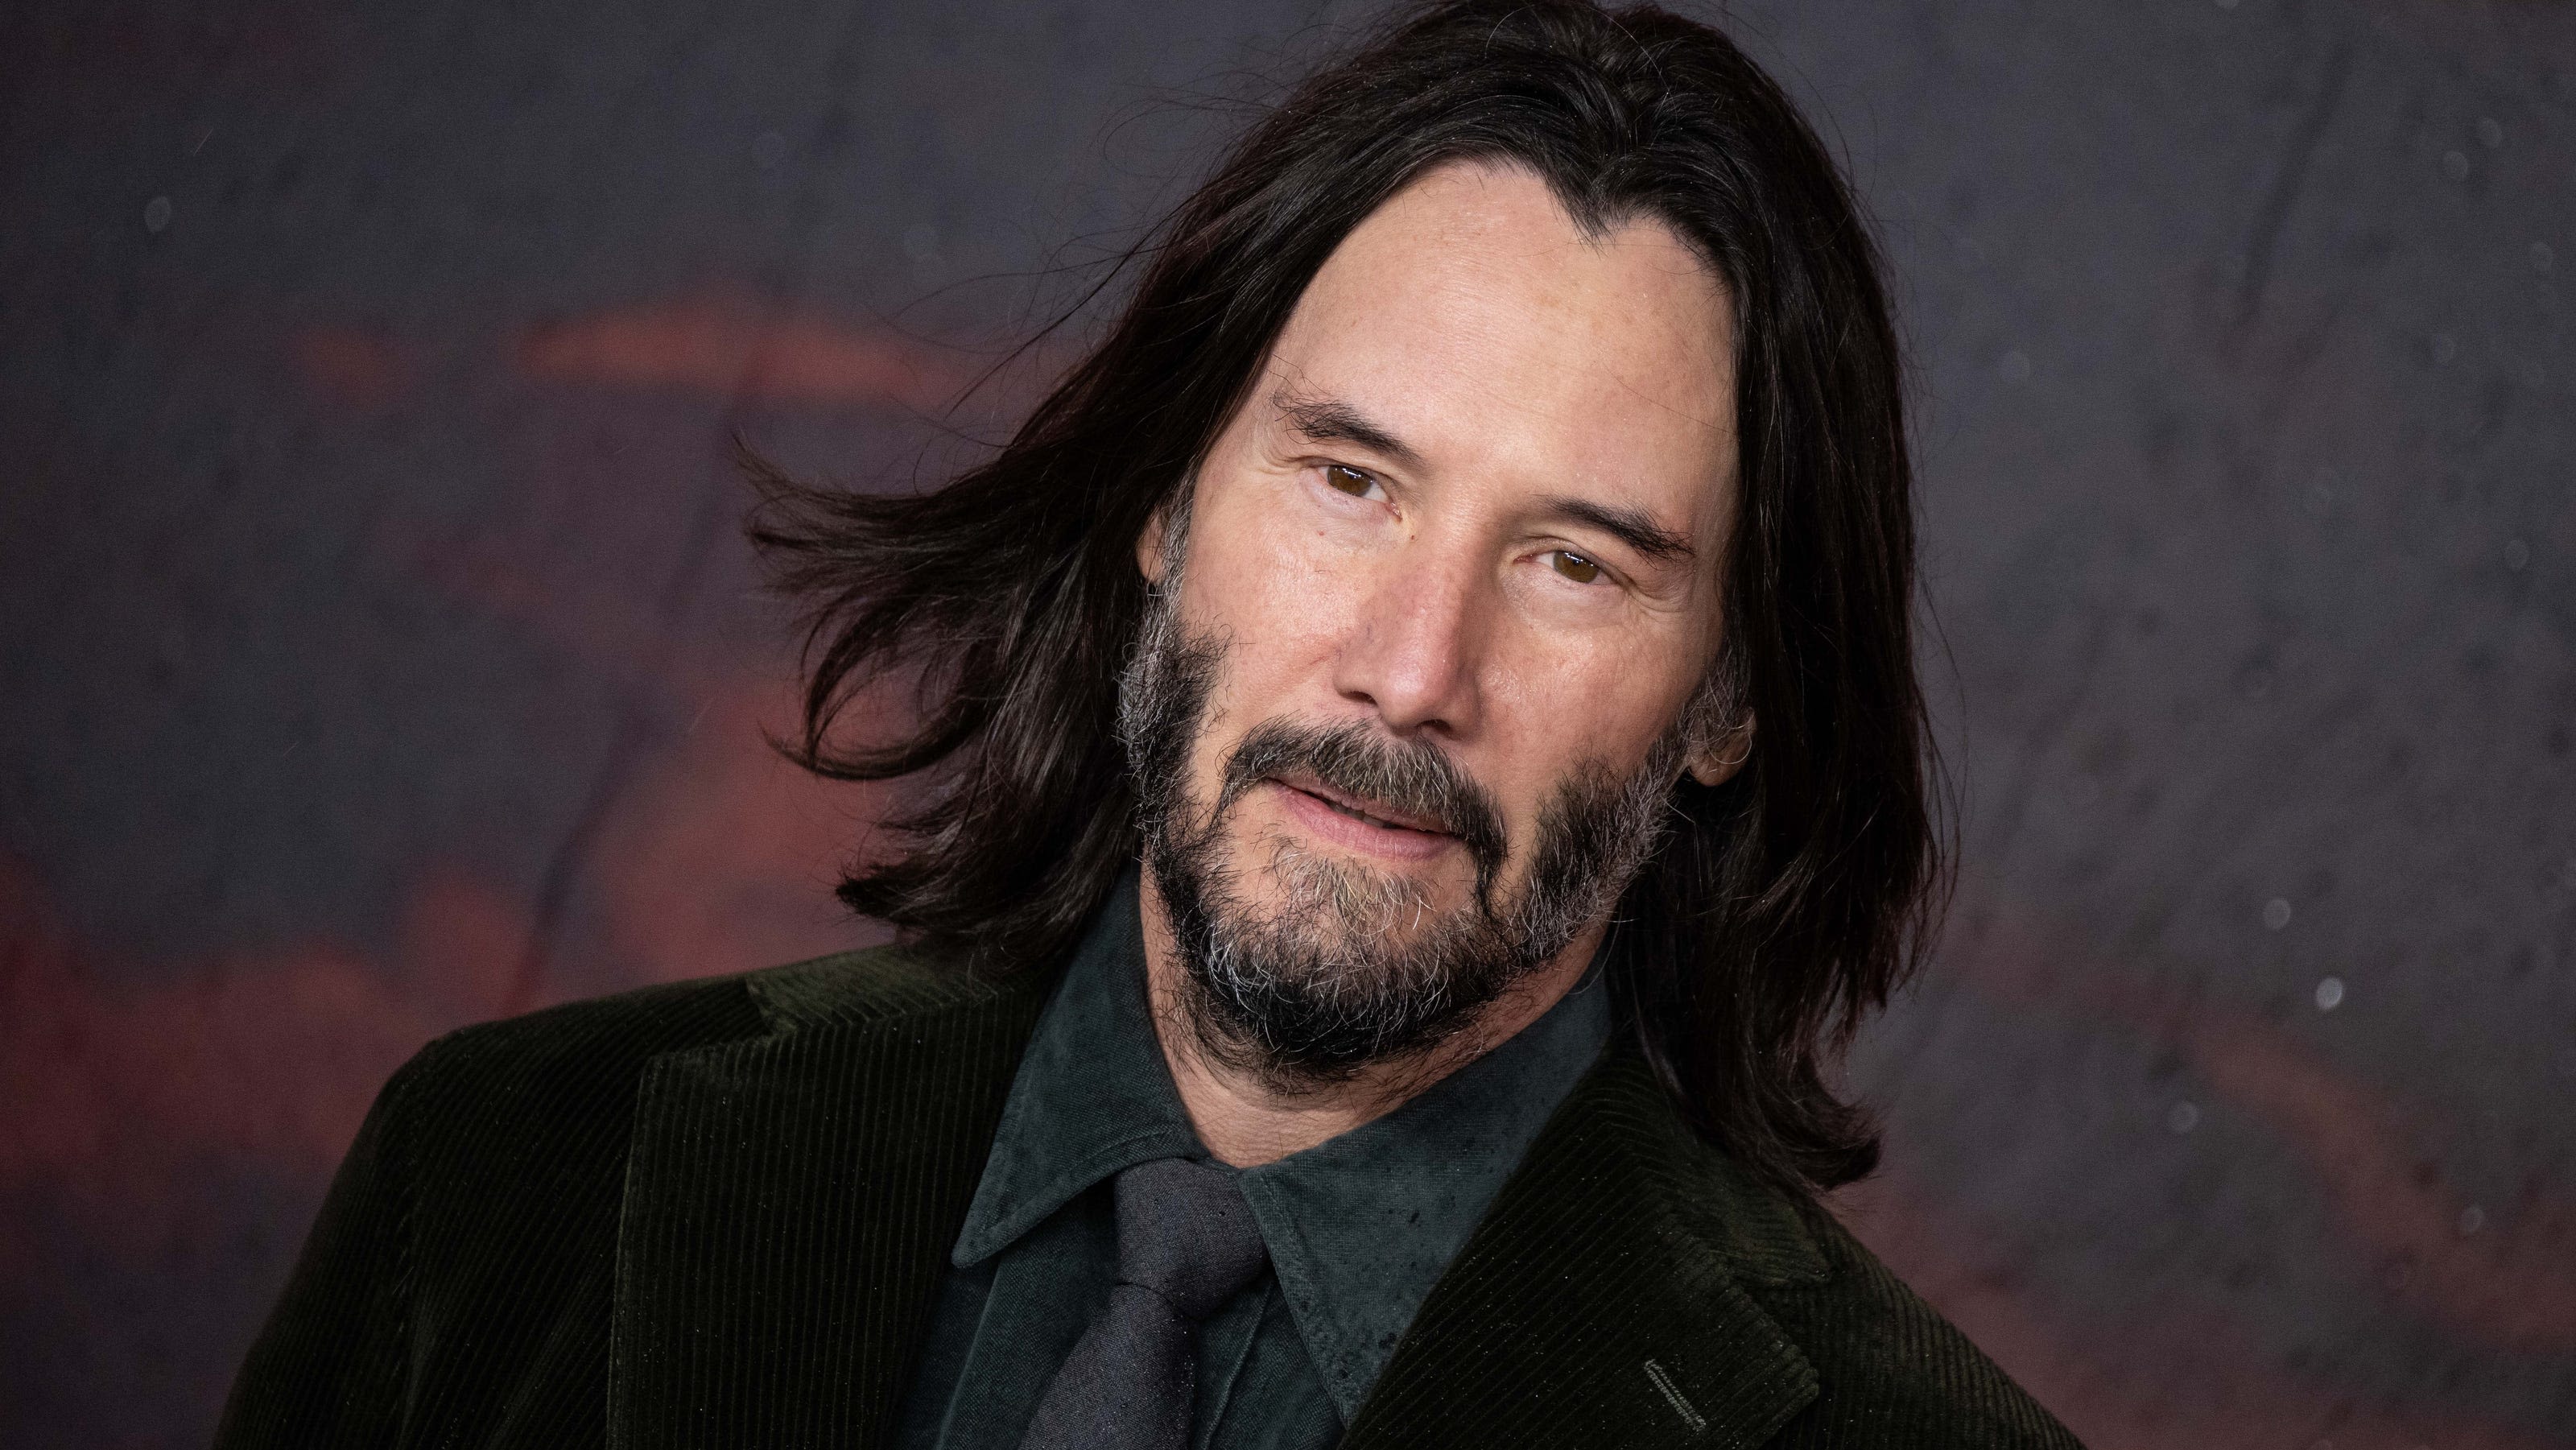 Keanu Reeves explains why it's good that he's 'thinking about death all the time'